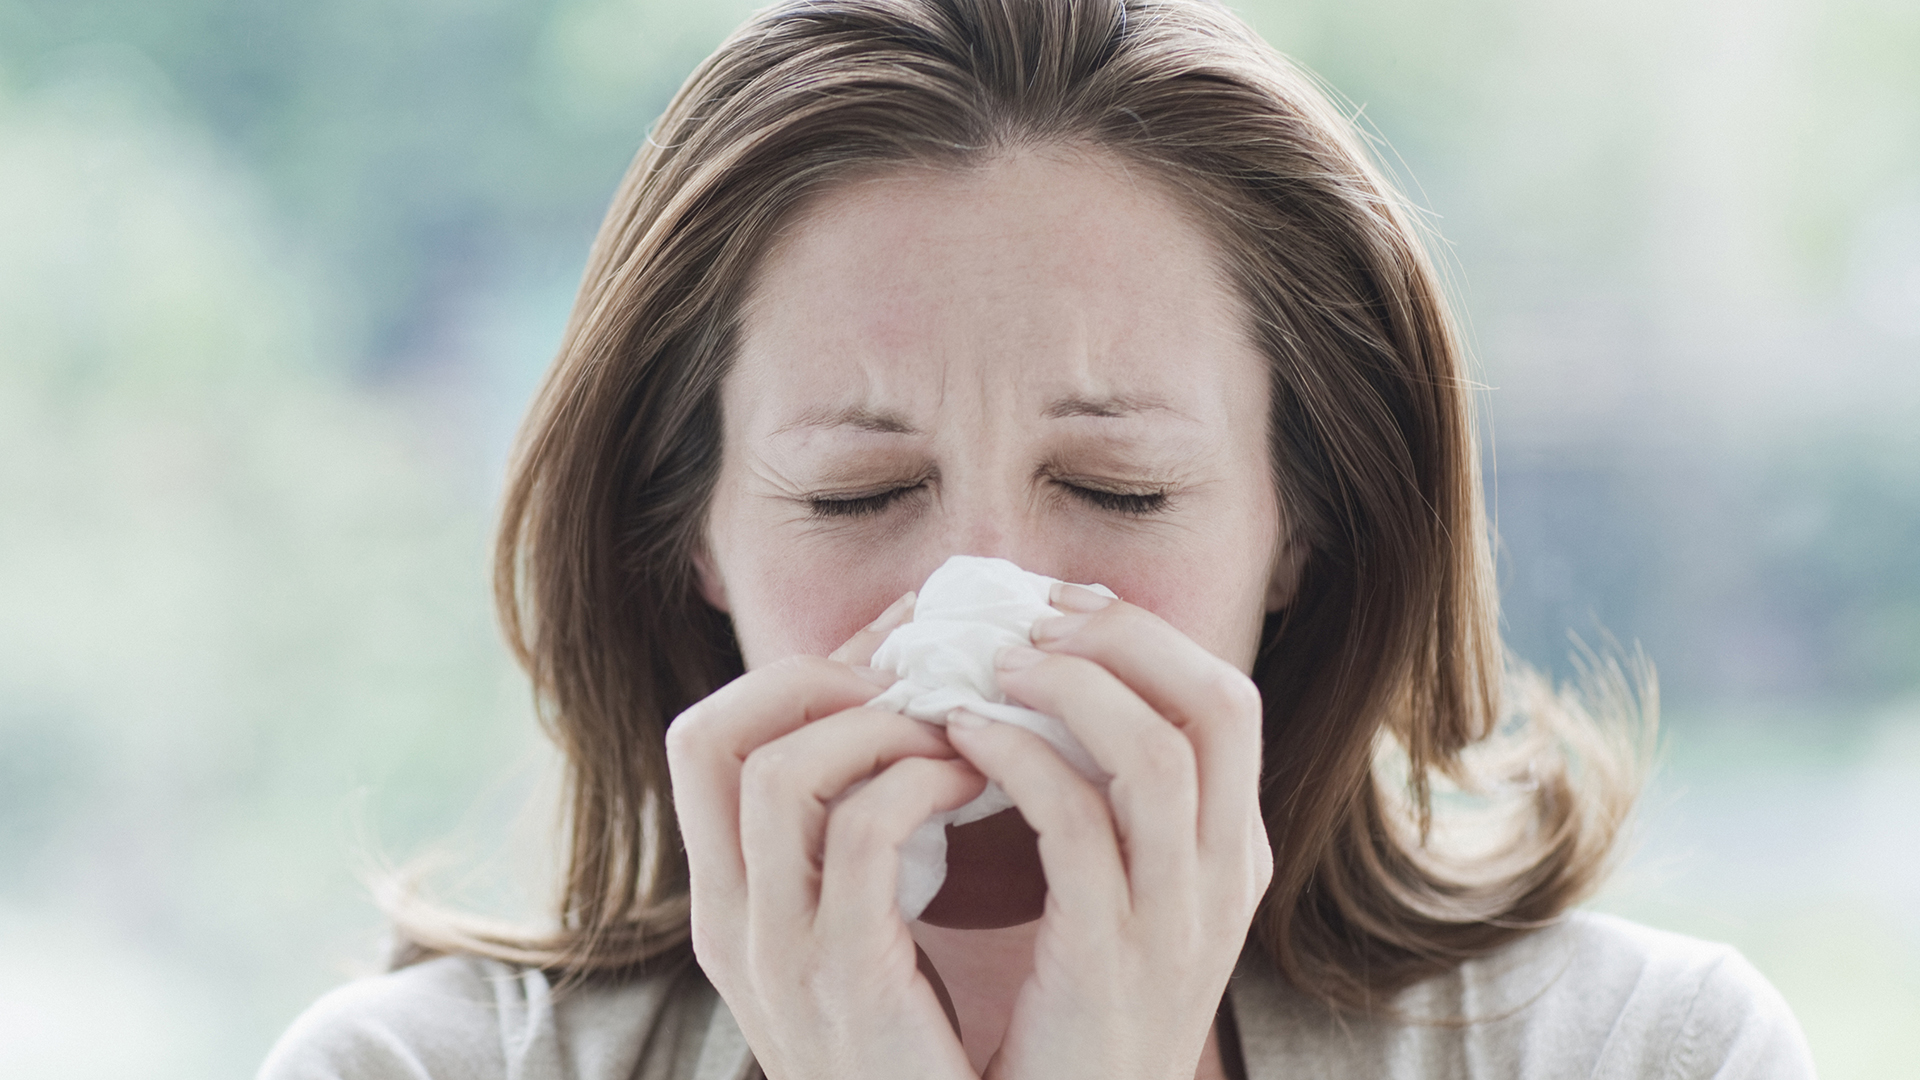 Home cleaning tips for allergy sufferers